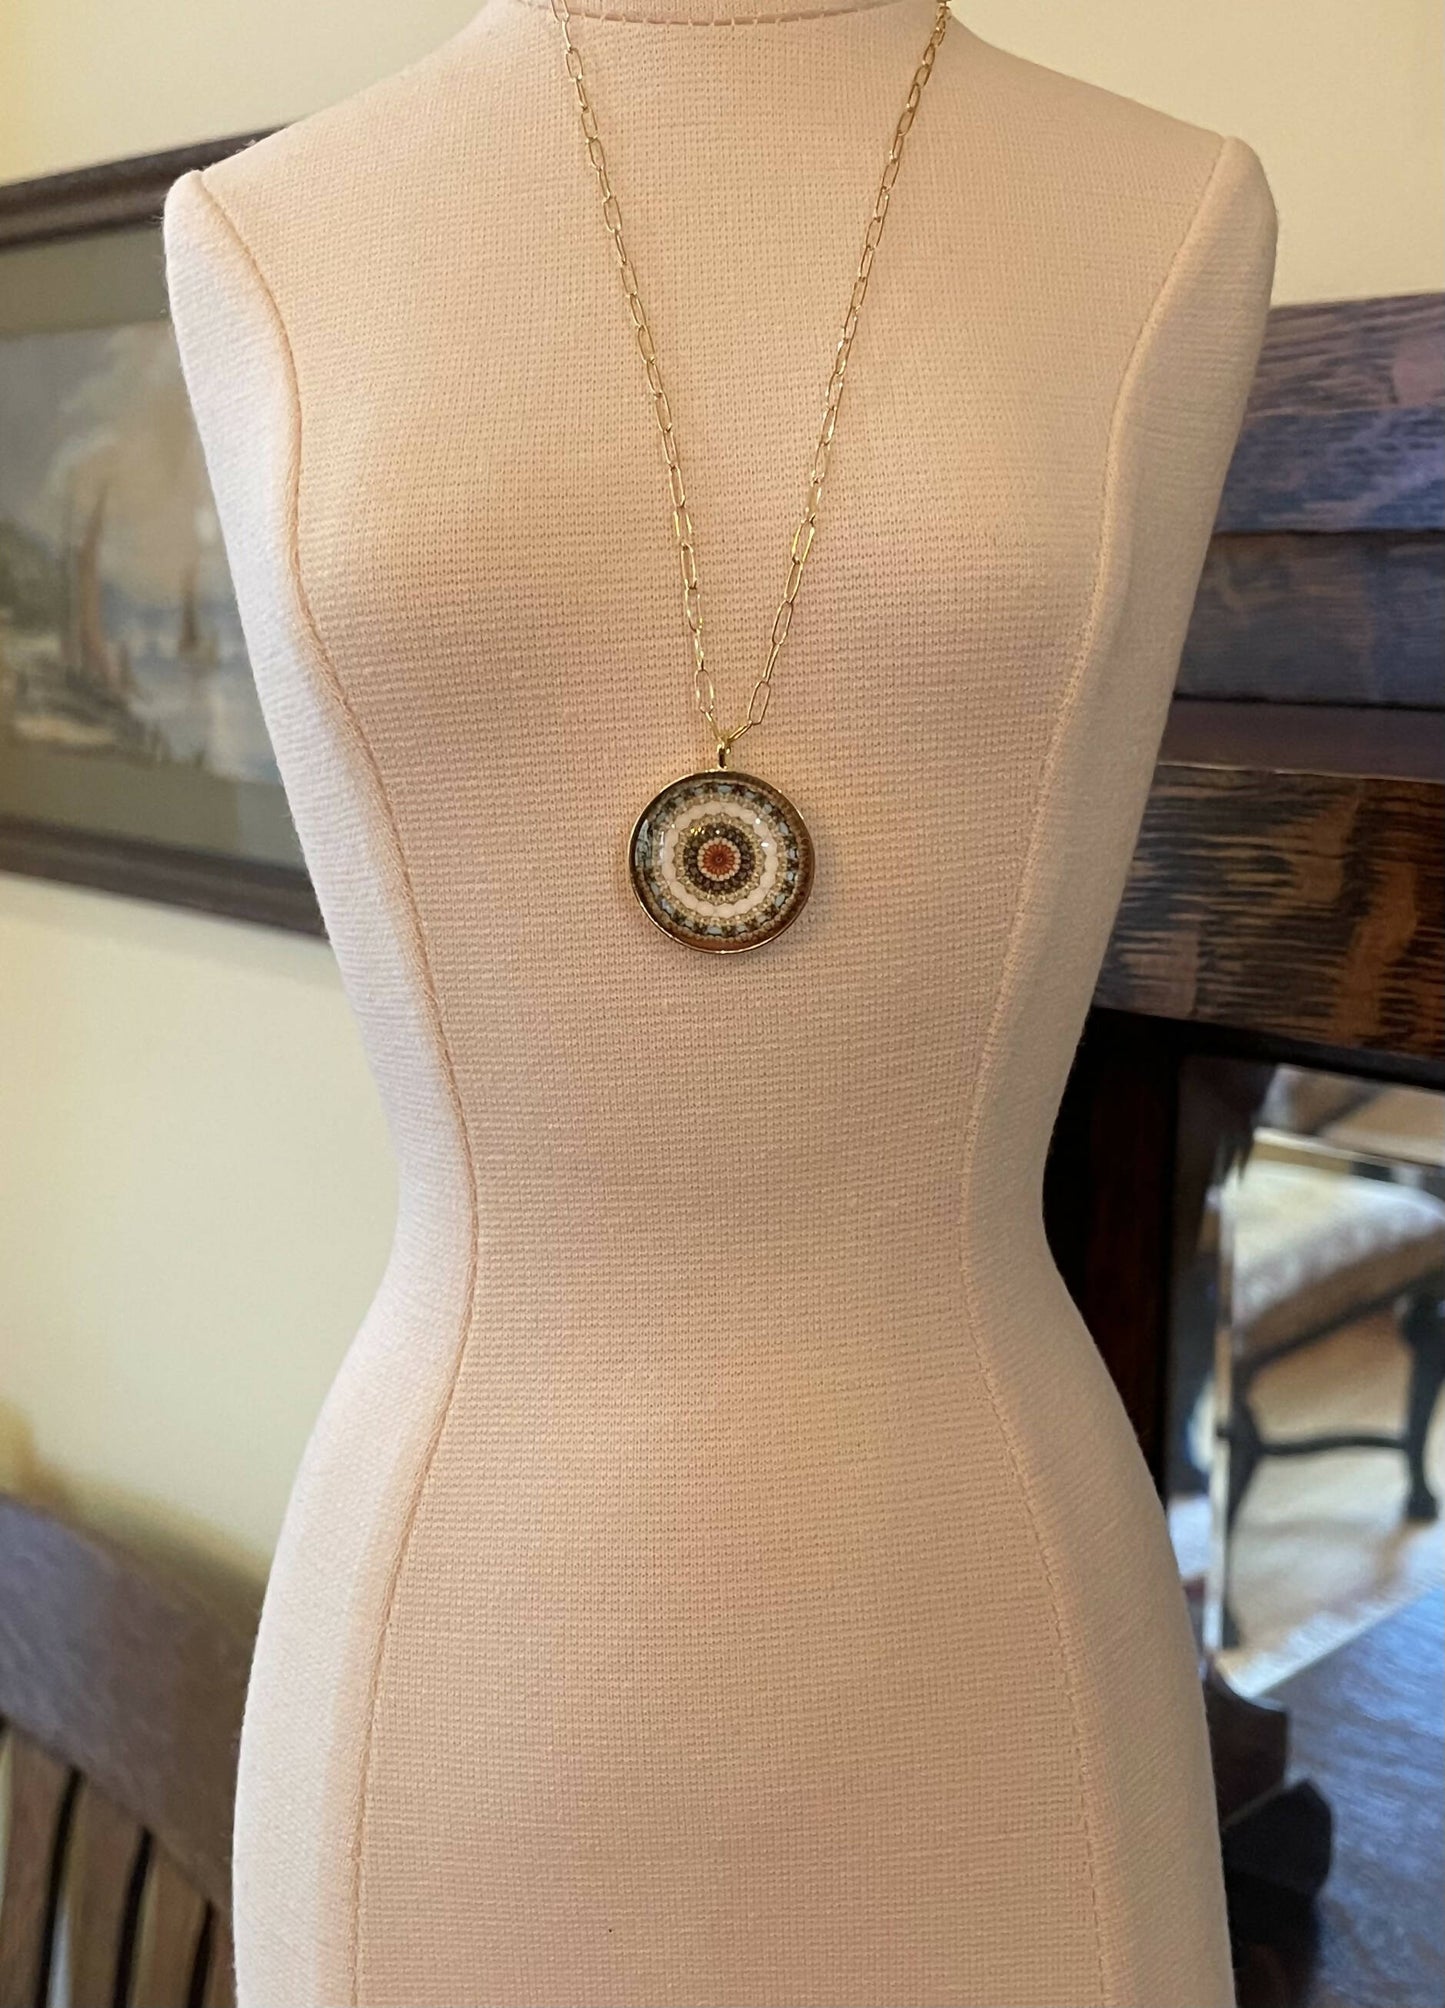 Driehaus Dome Necklace